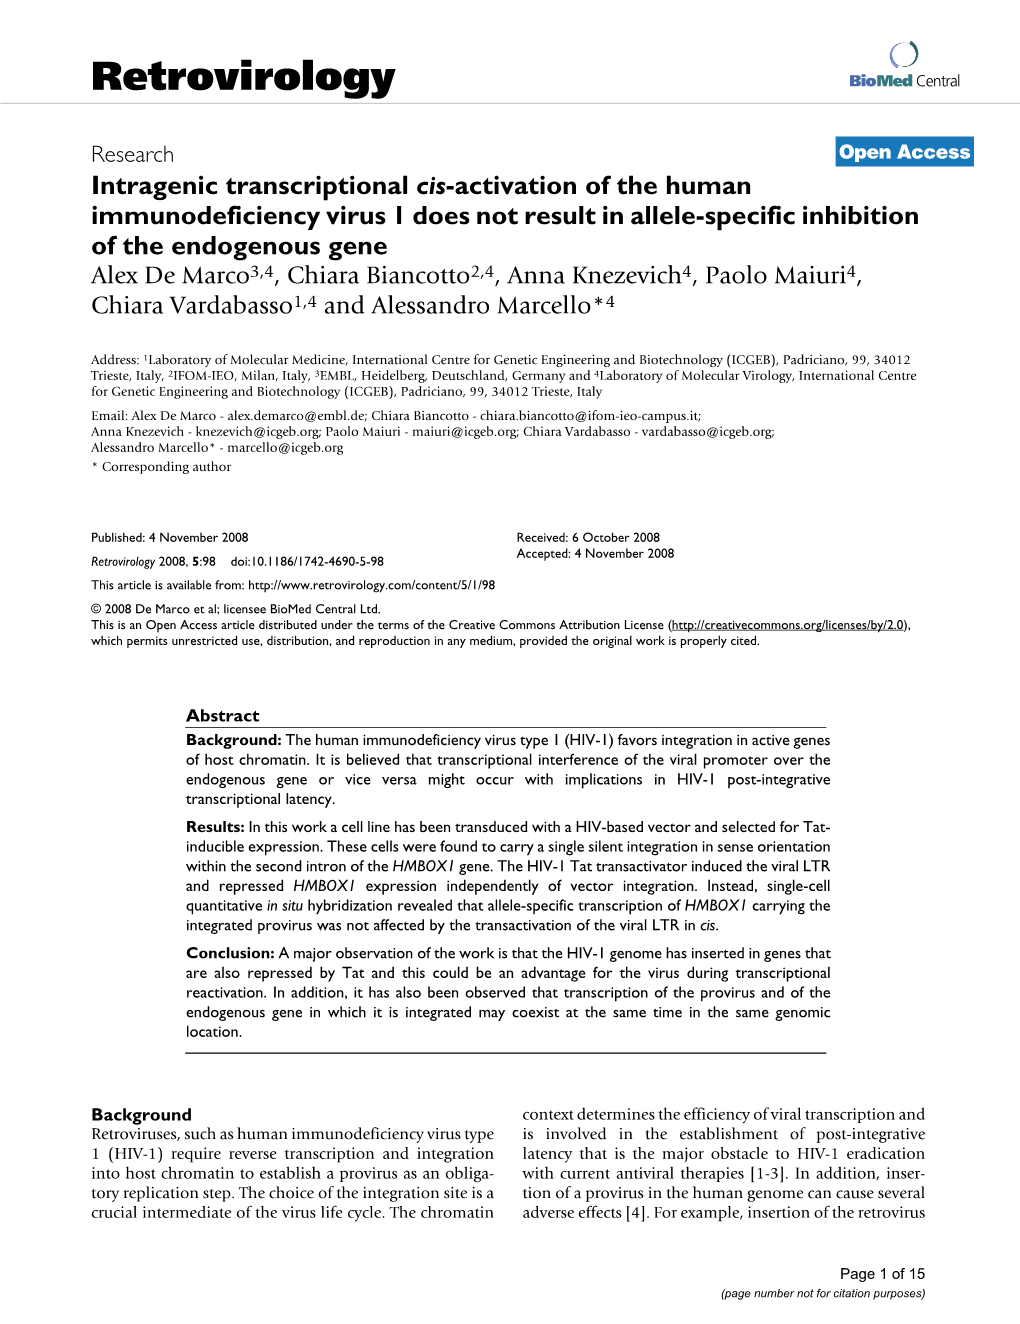 Intragenic Transcriptional Cis-Activation of the Human